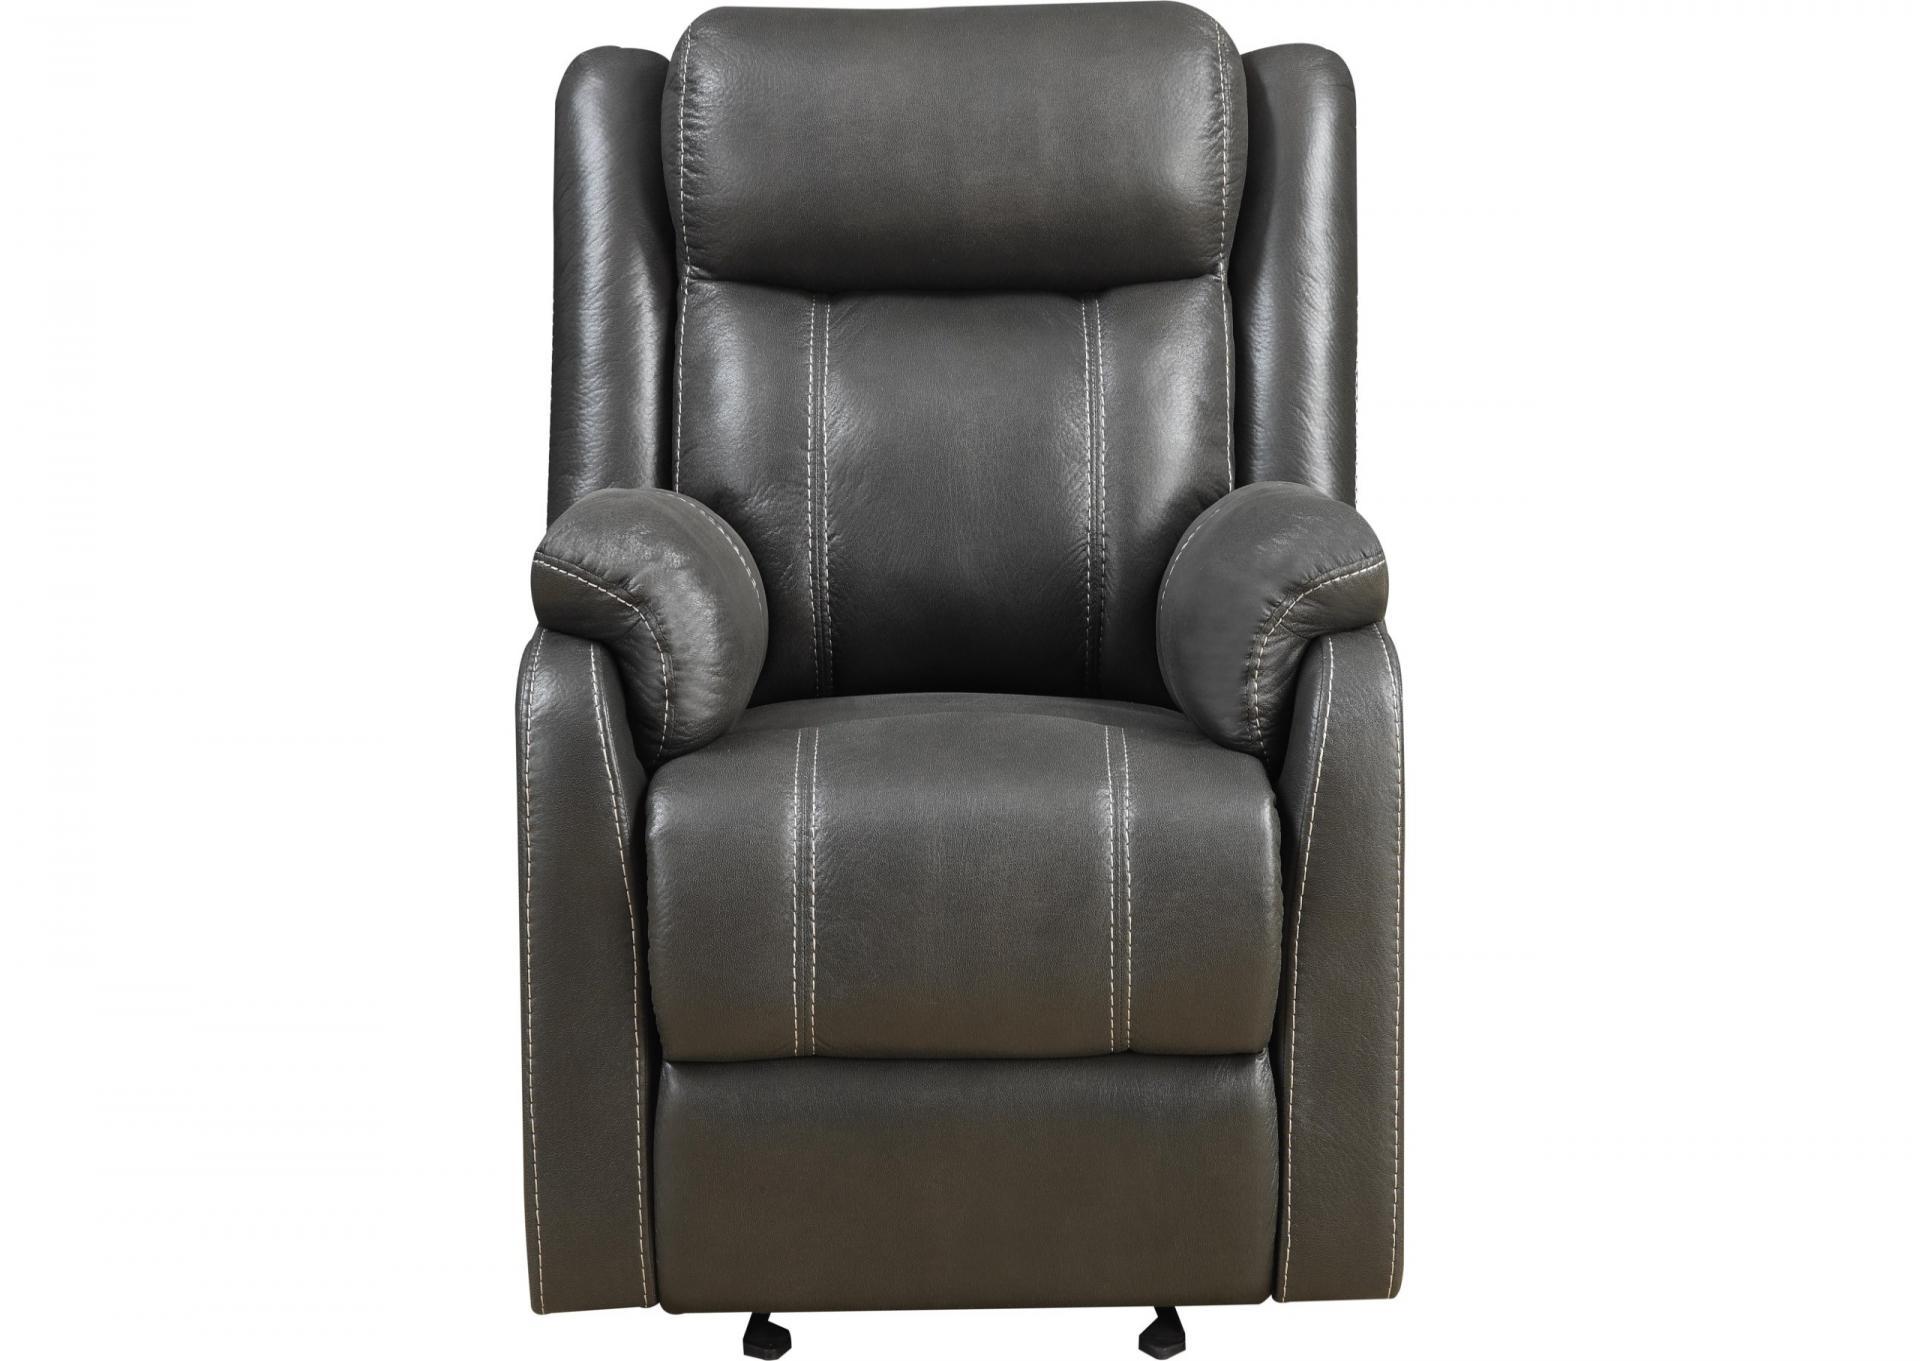 Manual Pull Cable Recliner in Gray Performance Fabric